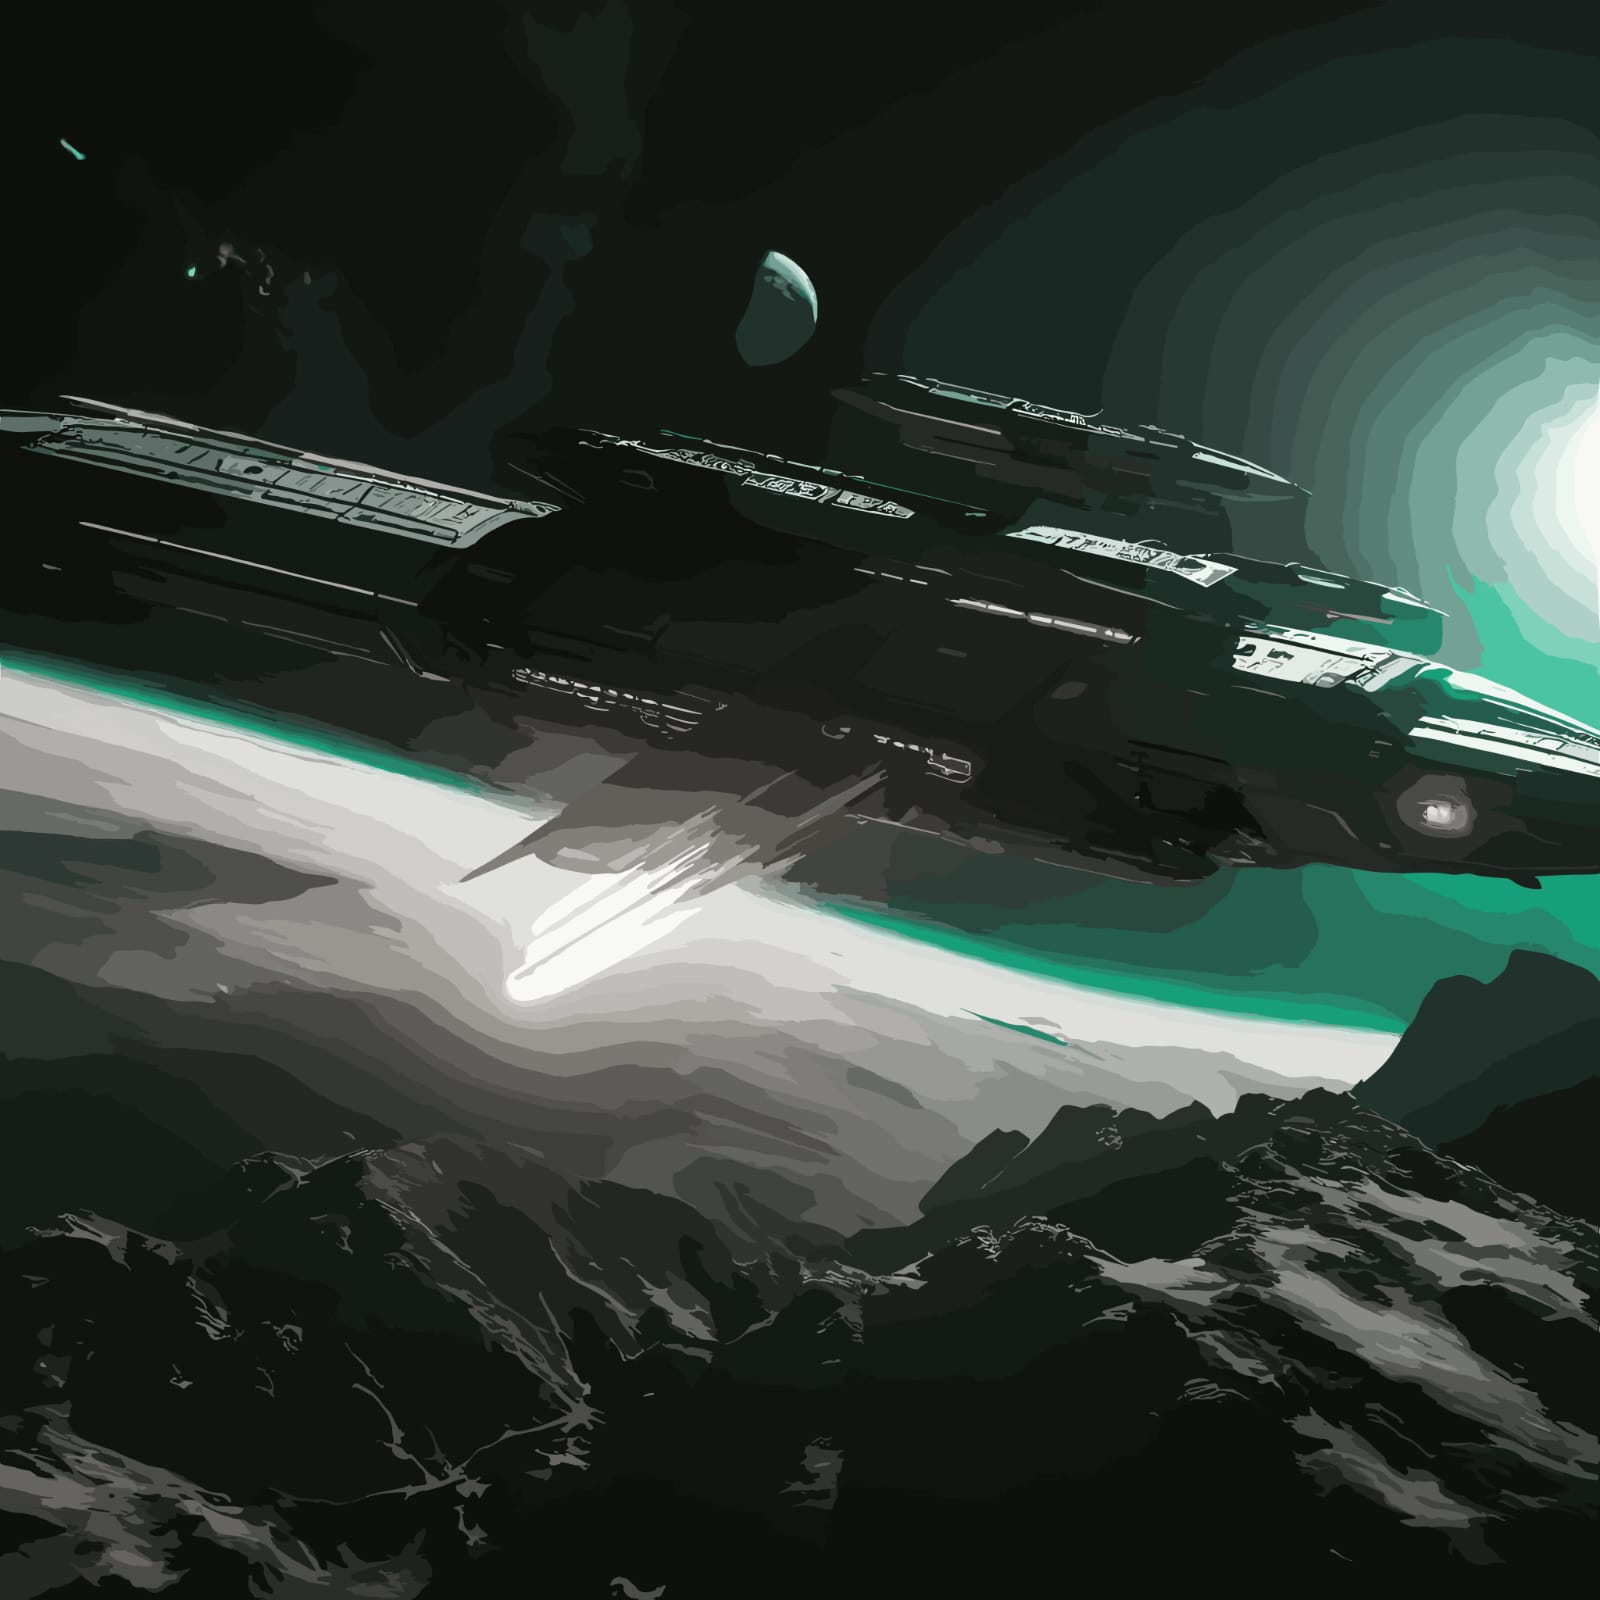 Warship Attacking A Planet preview image.